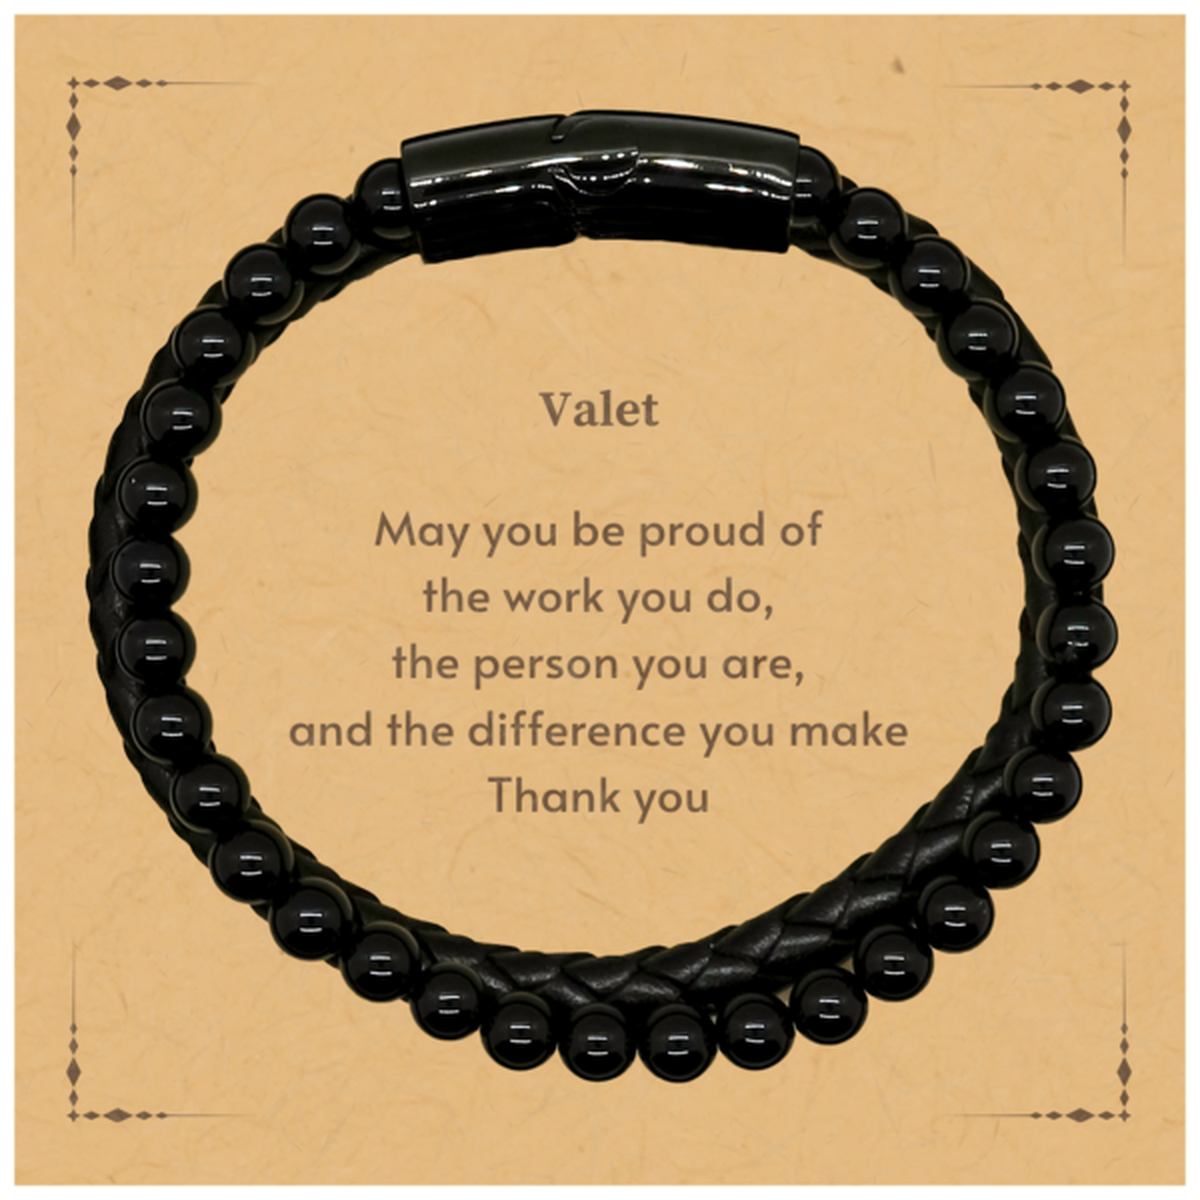 Heartwarming Stone Leather Bracelets Retirement Coworkers Gifts for Valet, Valet May You be proud of the work you do, the person you are Gifts for Boss Men Women Friends